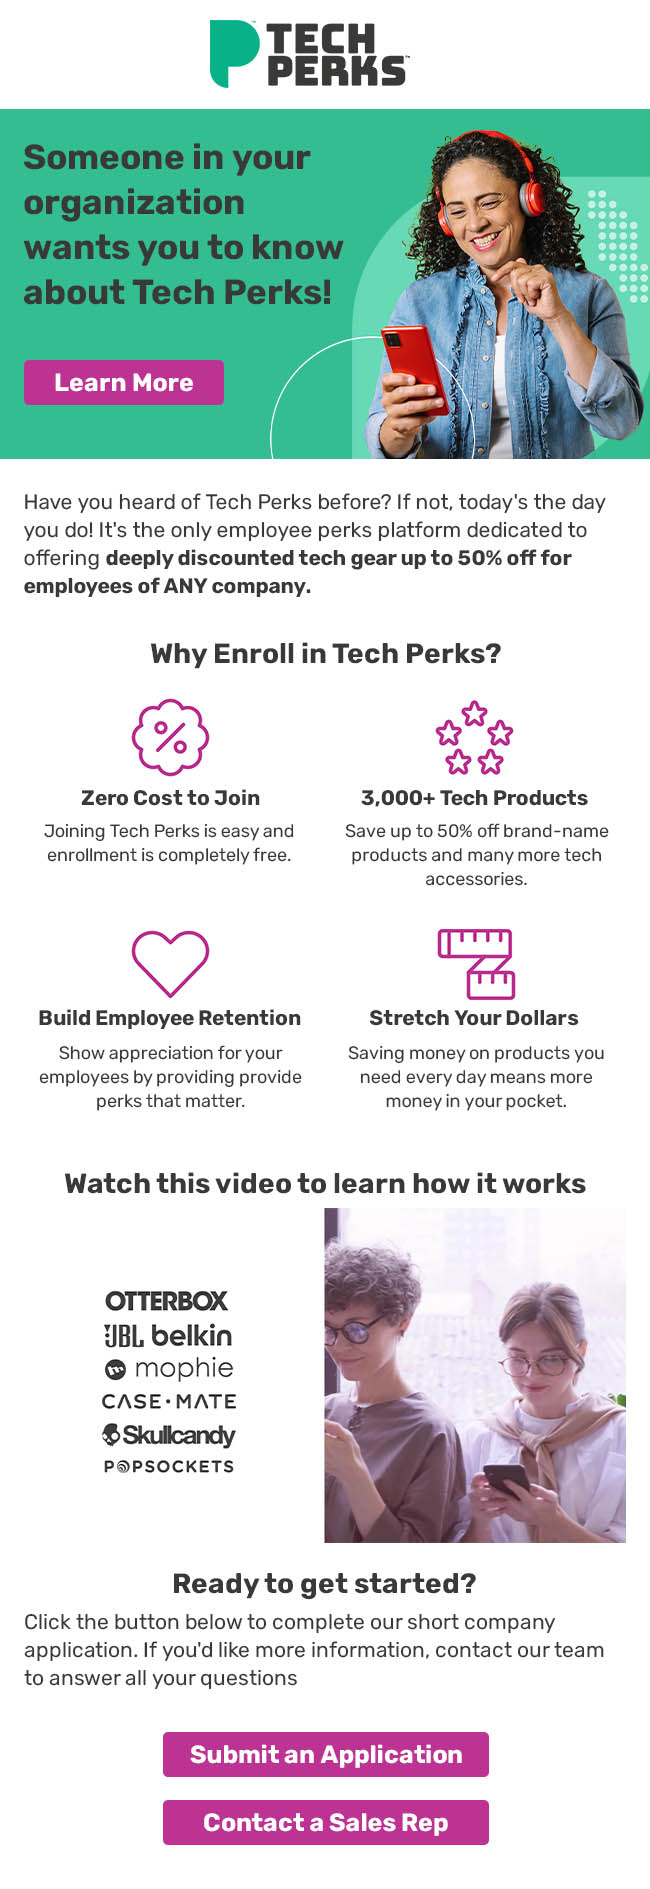 Tech Perks Cold Call Email